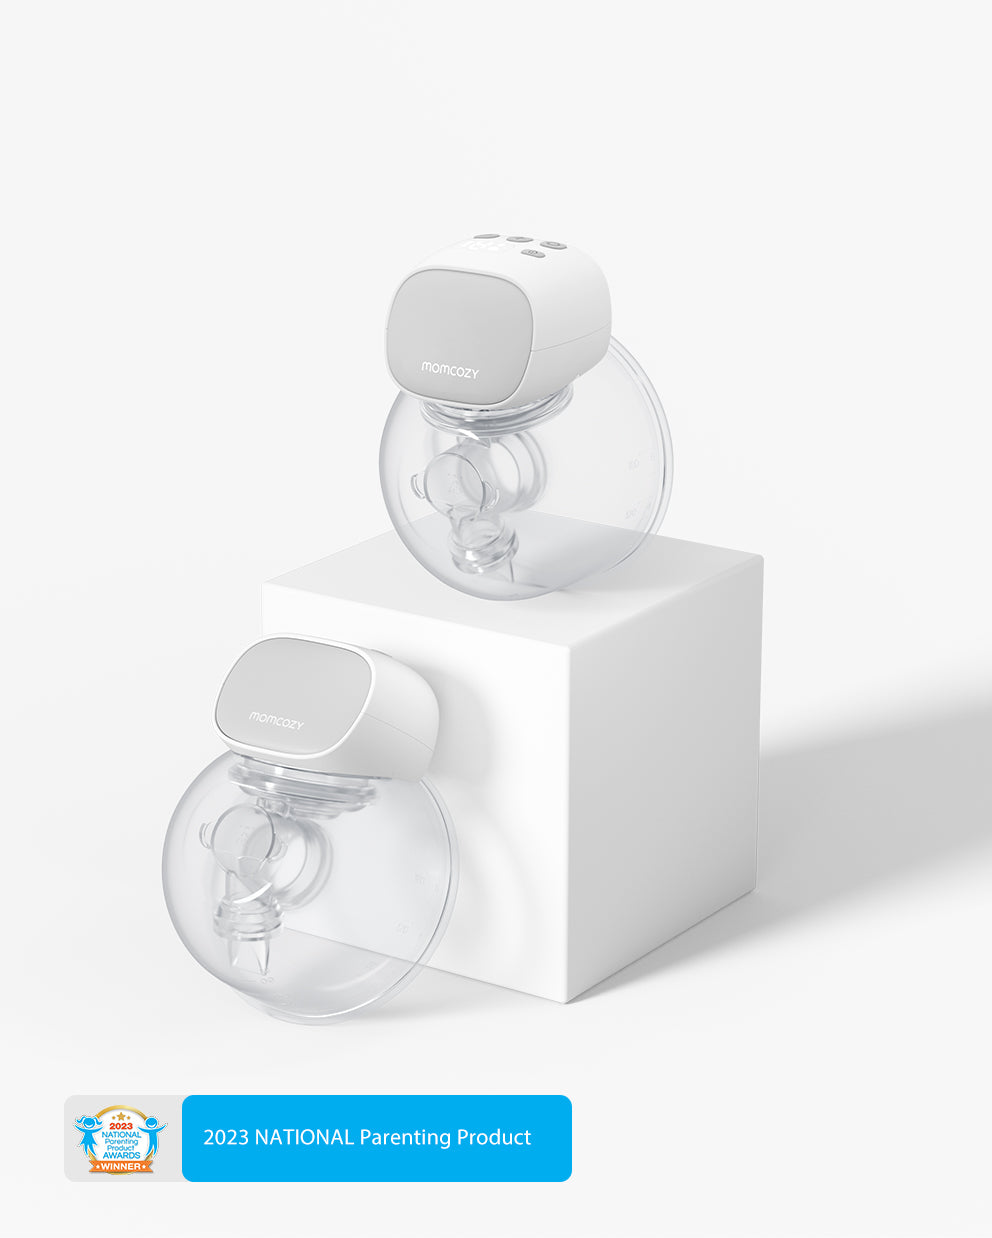 Momcozy S9 Pro Breast Pump Kshs 23,000 Less Time, More Milk - Momcozy S9  Pro wearable breast pump with 2 modes & 9 levels. Imitating th